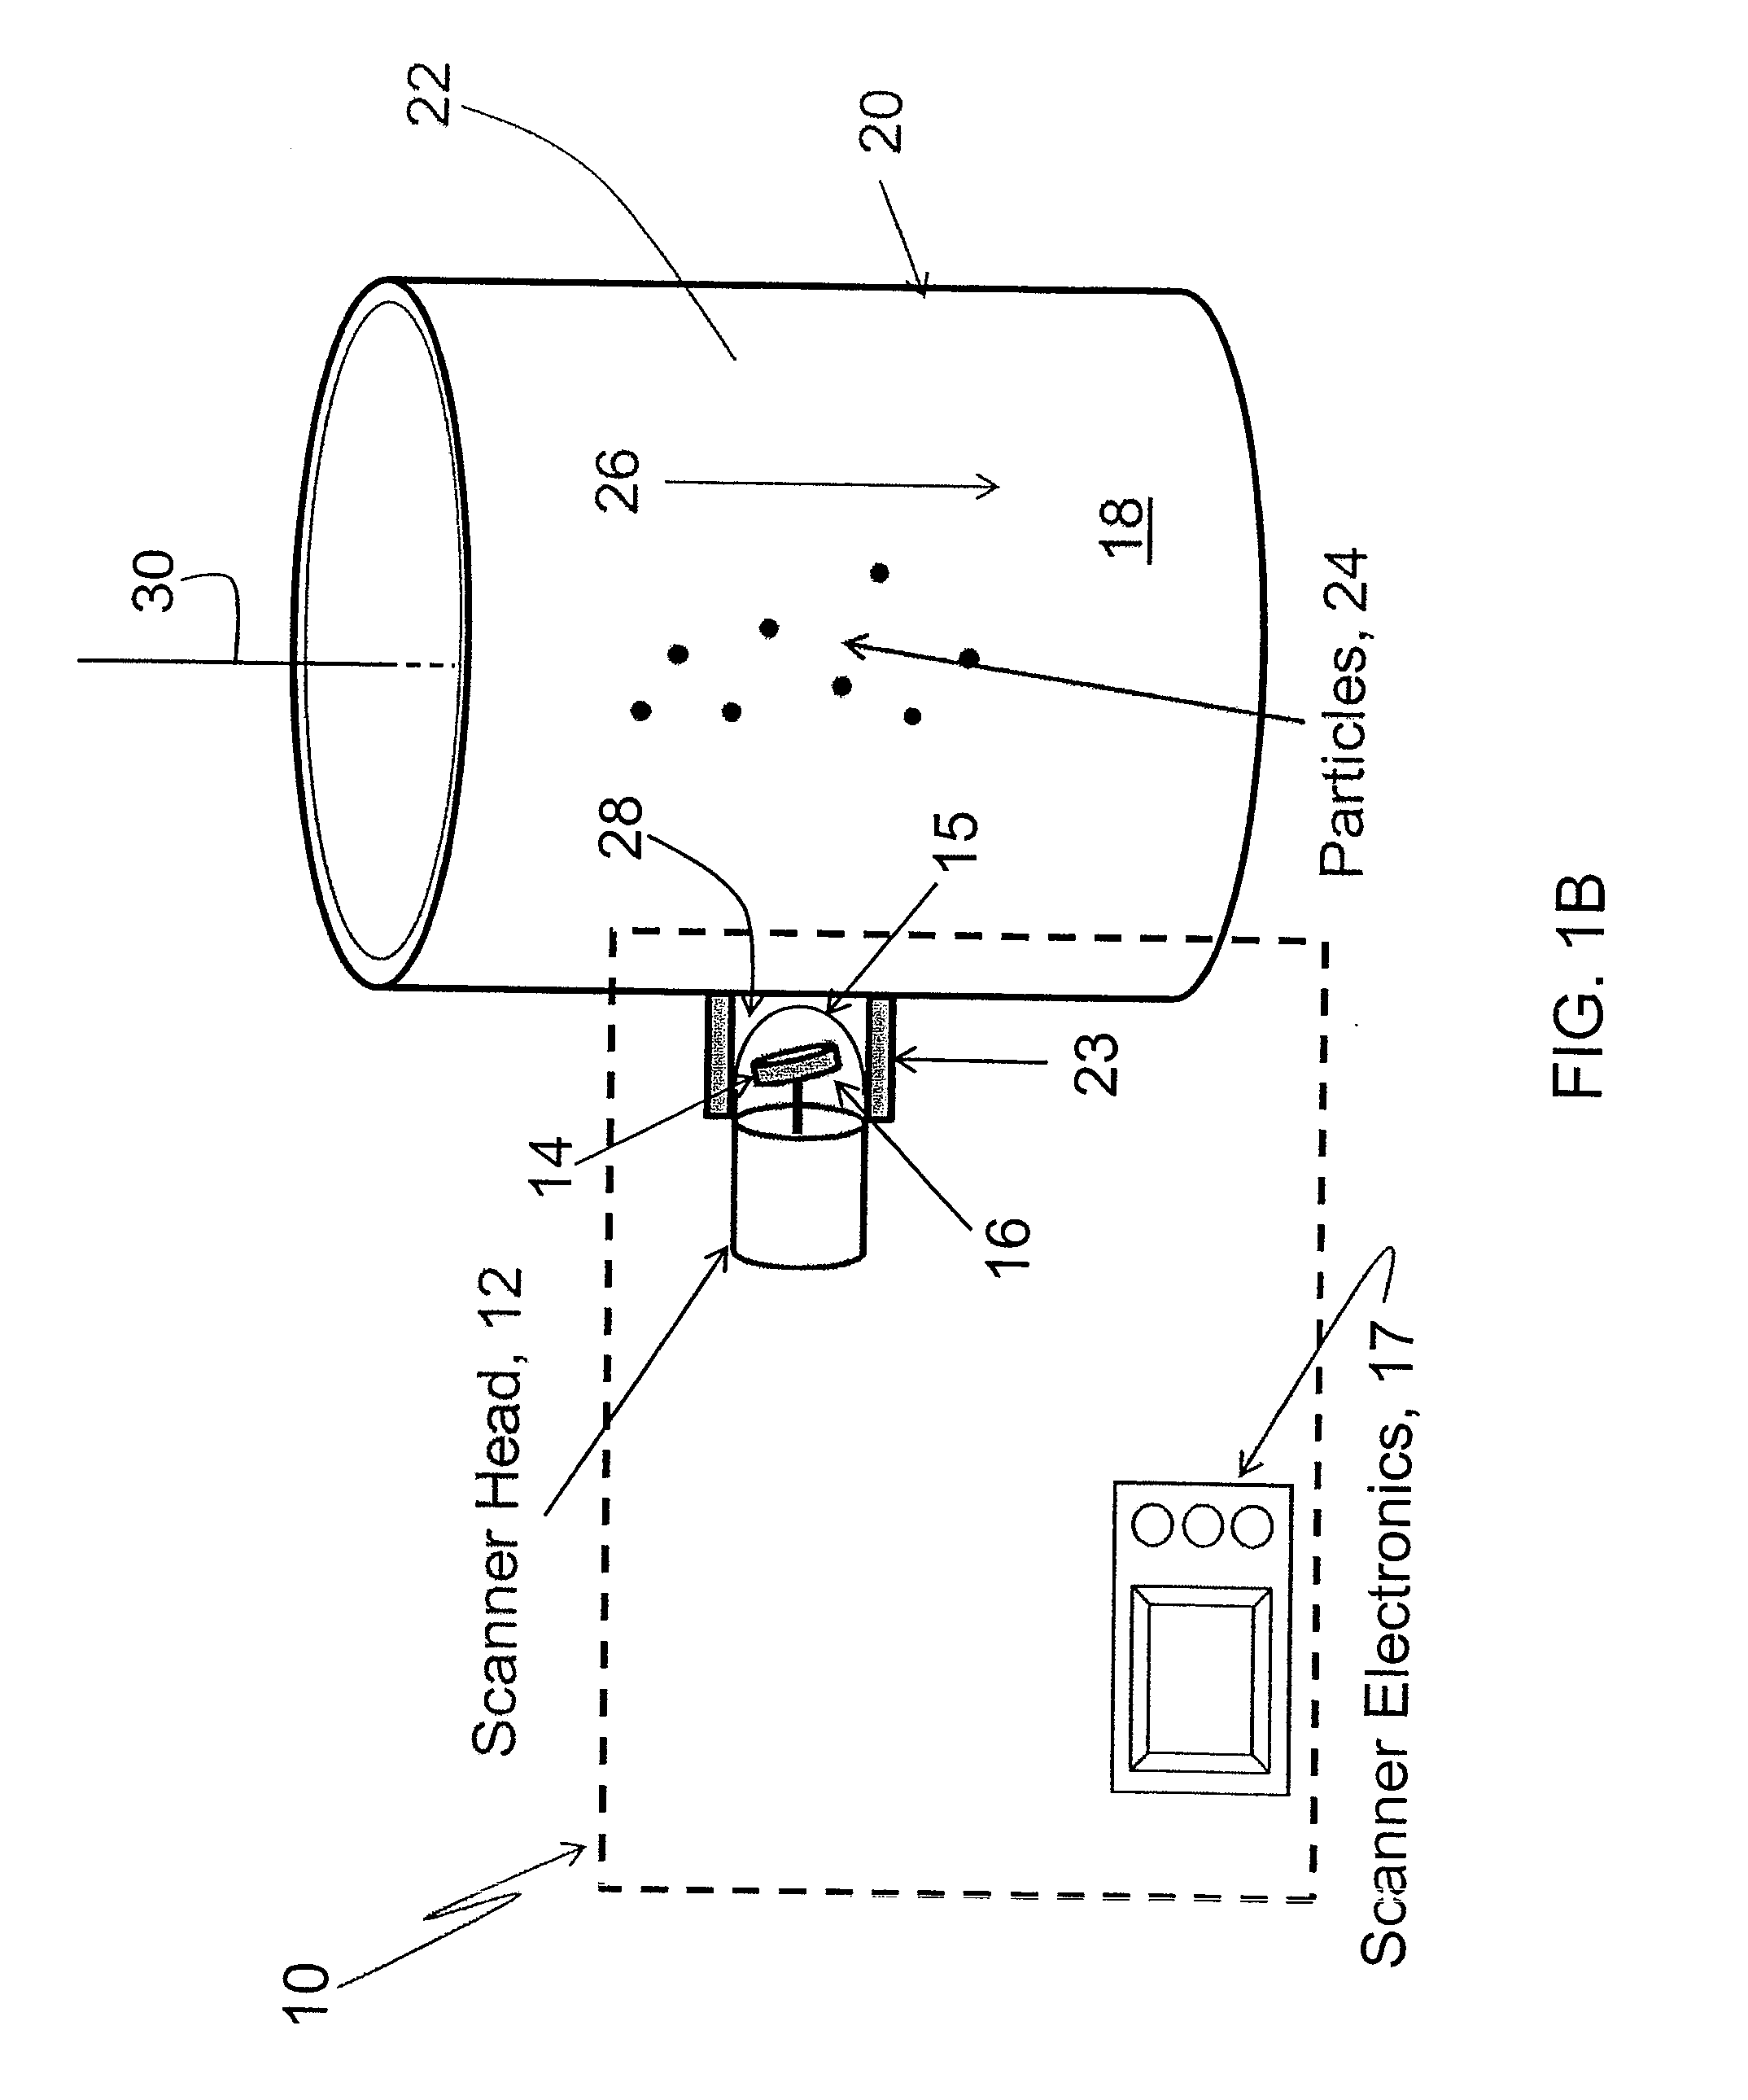 Apparatus and method for visualization of particles suspended in a fluid and fluid flow patterns using ultrasound